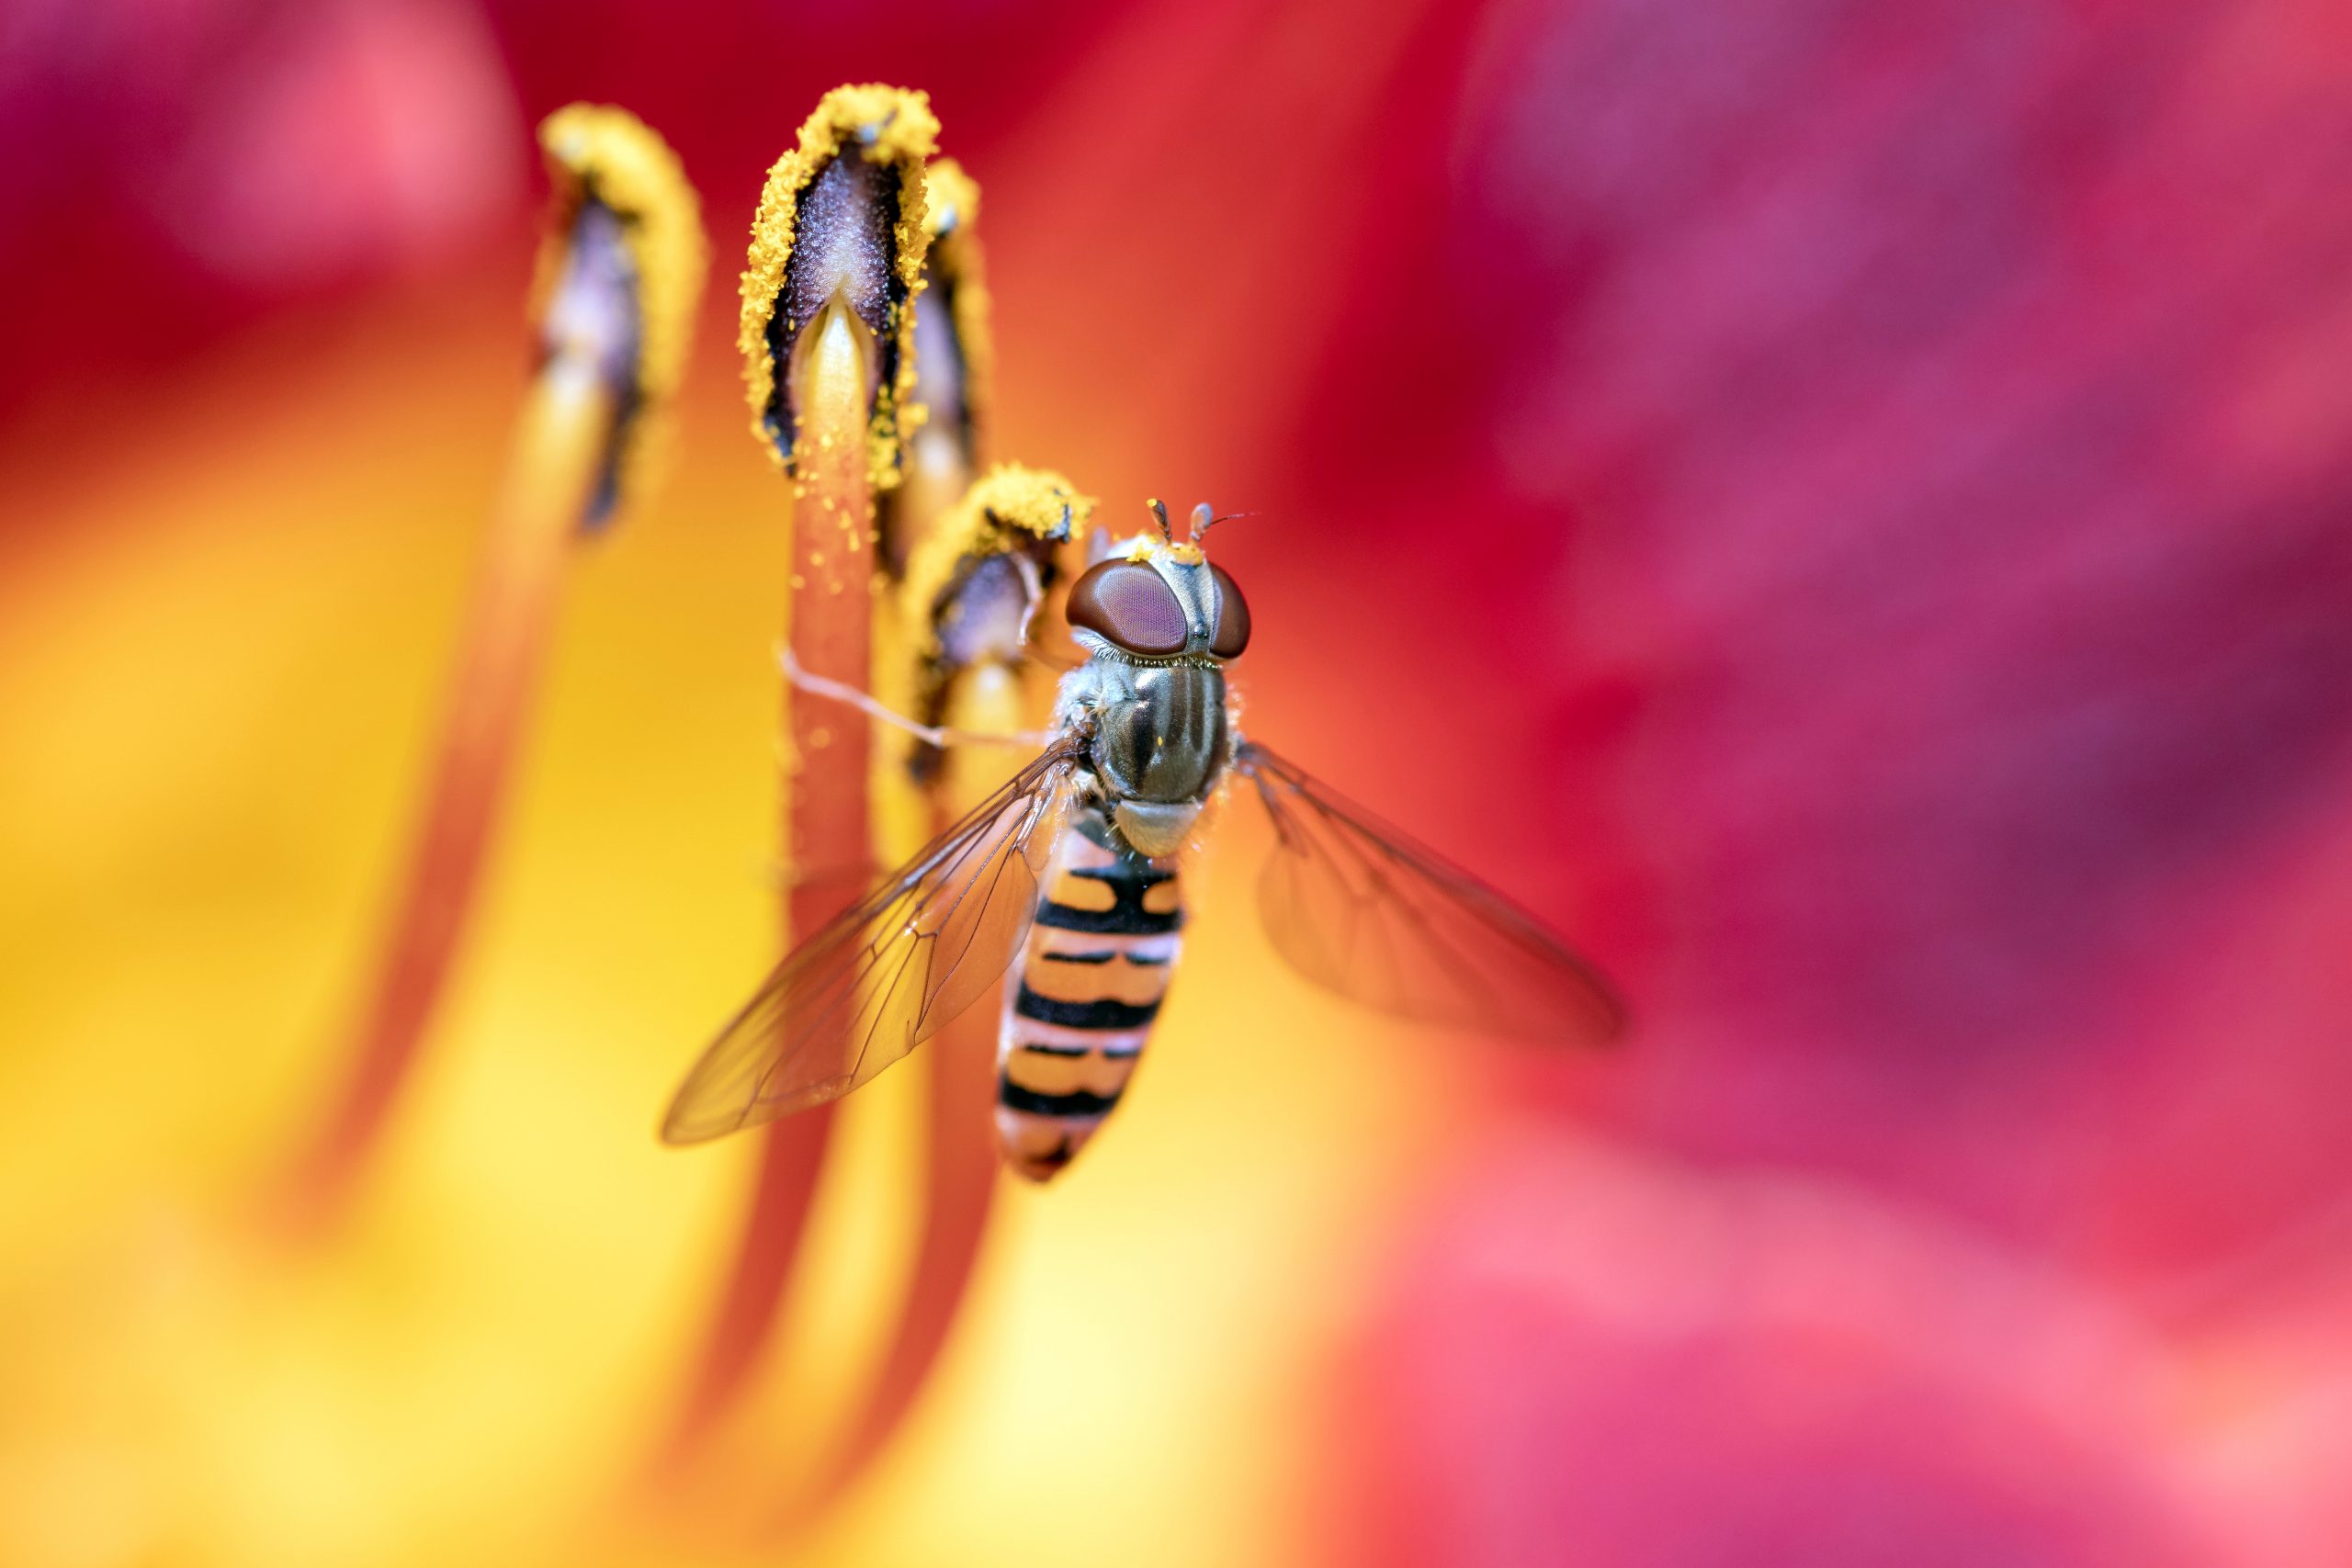 Marmalade hoverfly &#8211; Episyrphus balteatus in a day lily blossom, Hemerocallis